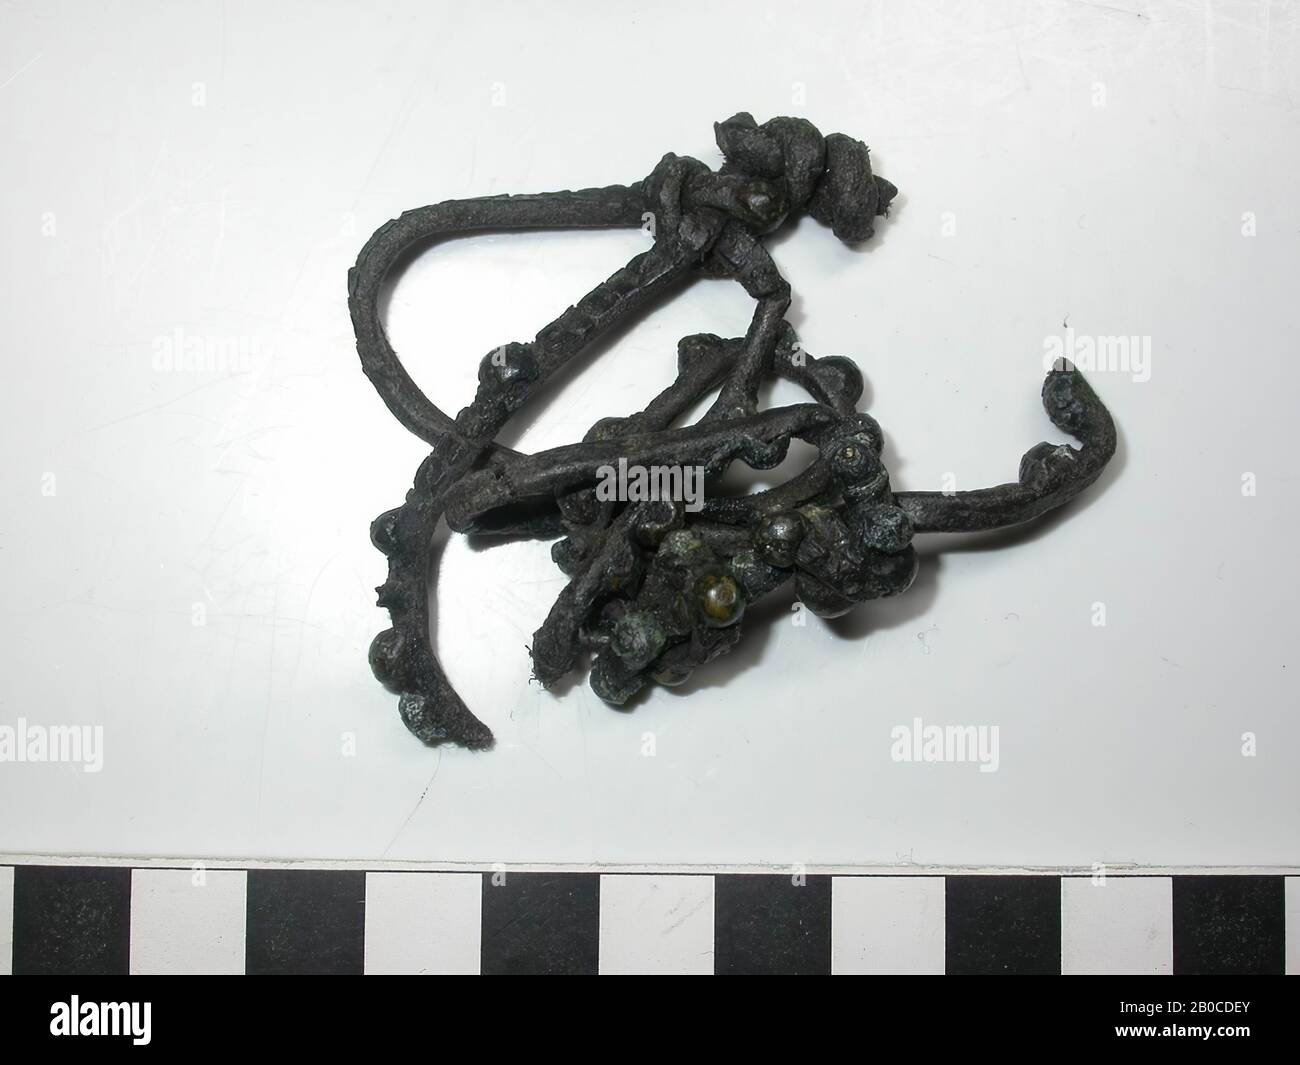 Fragments leather belt with fittings. Several pieces of leather belt that are tied together with 4 buttons, it is not clear how many fragments are involved. On the fragments are about 30 decorative nails (diameter 0.45 cm, thickness 0.3 cm) with a lead core and a cap of copper alloy, there are some missing studs with cap and there is one stud without visible cap visible. The color of the batter is dark gray to black because of the corrosion of the lead. There is no space between the caps and the fittings are as wide as the leather. Thickness with batter: 0.55 cm., Nail diameter: 0.1 cm., Belt Stock Photo